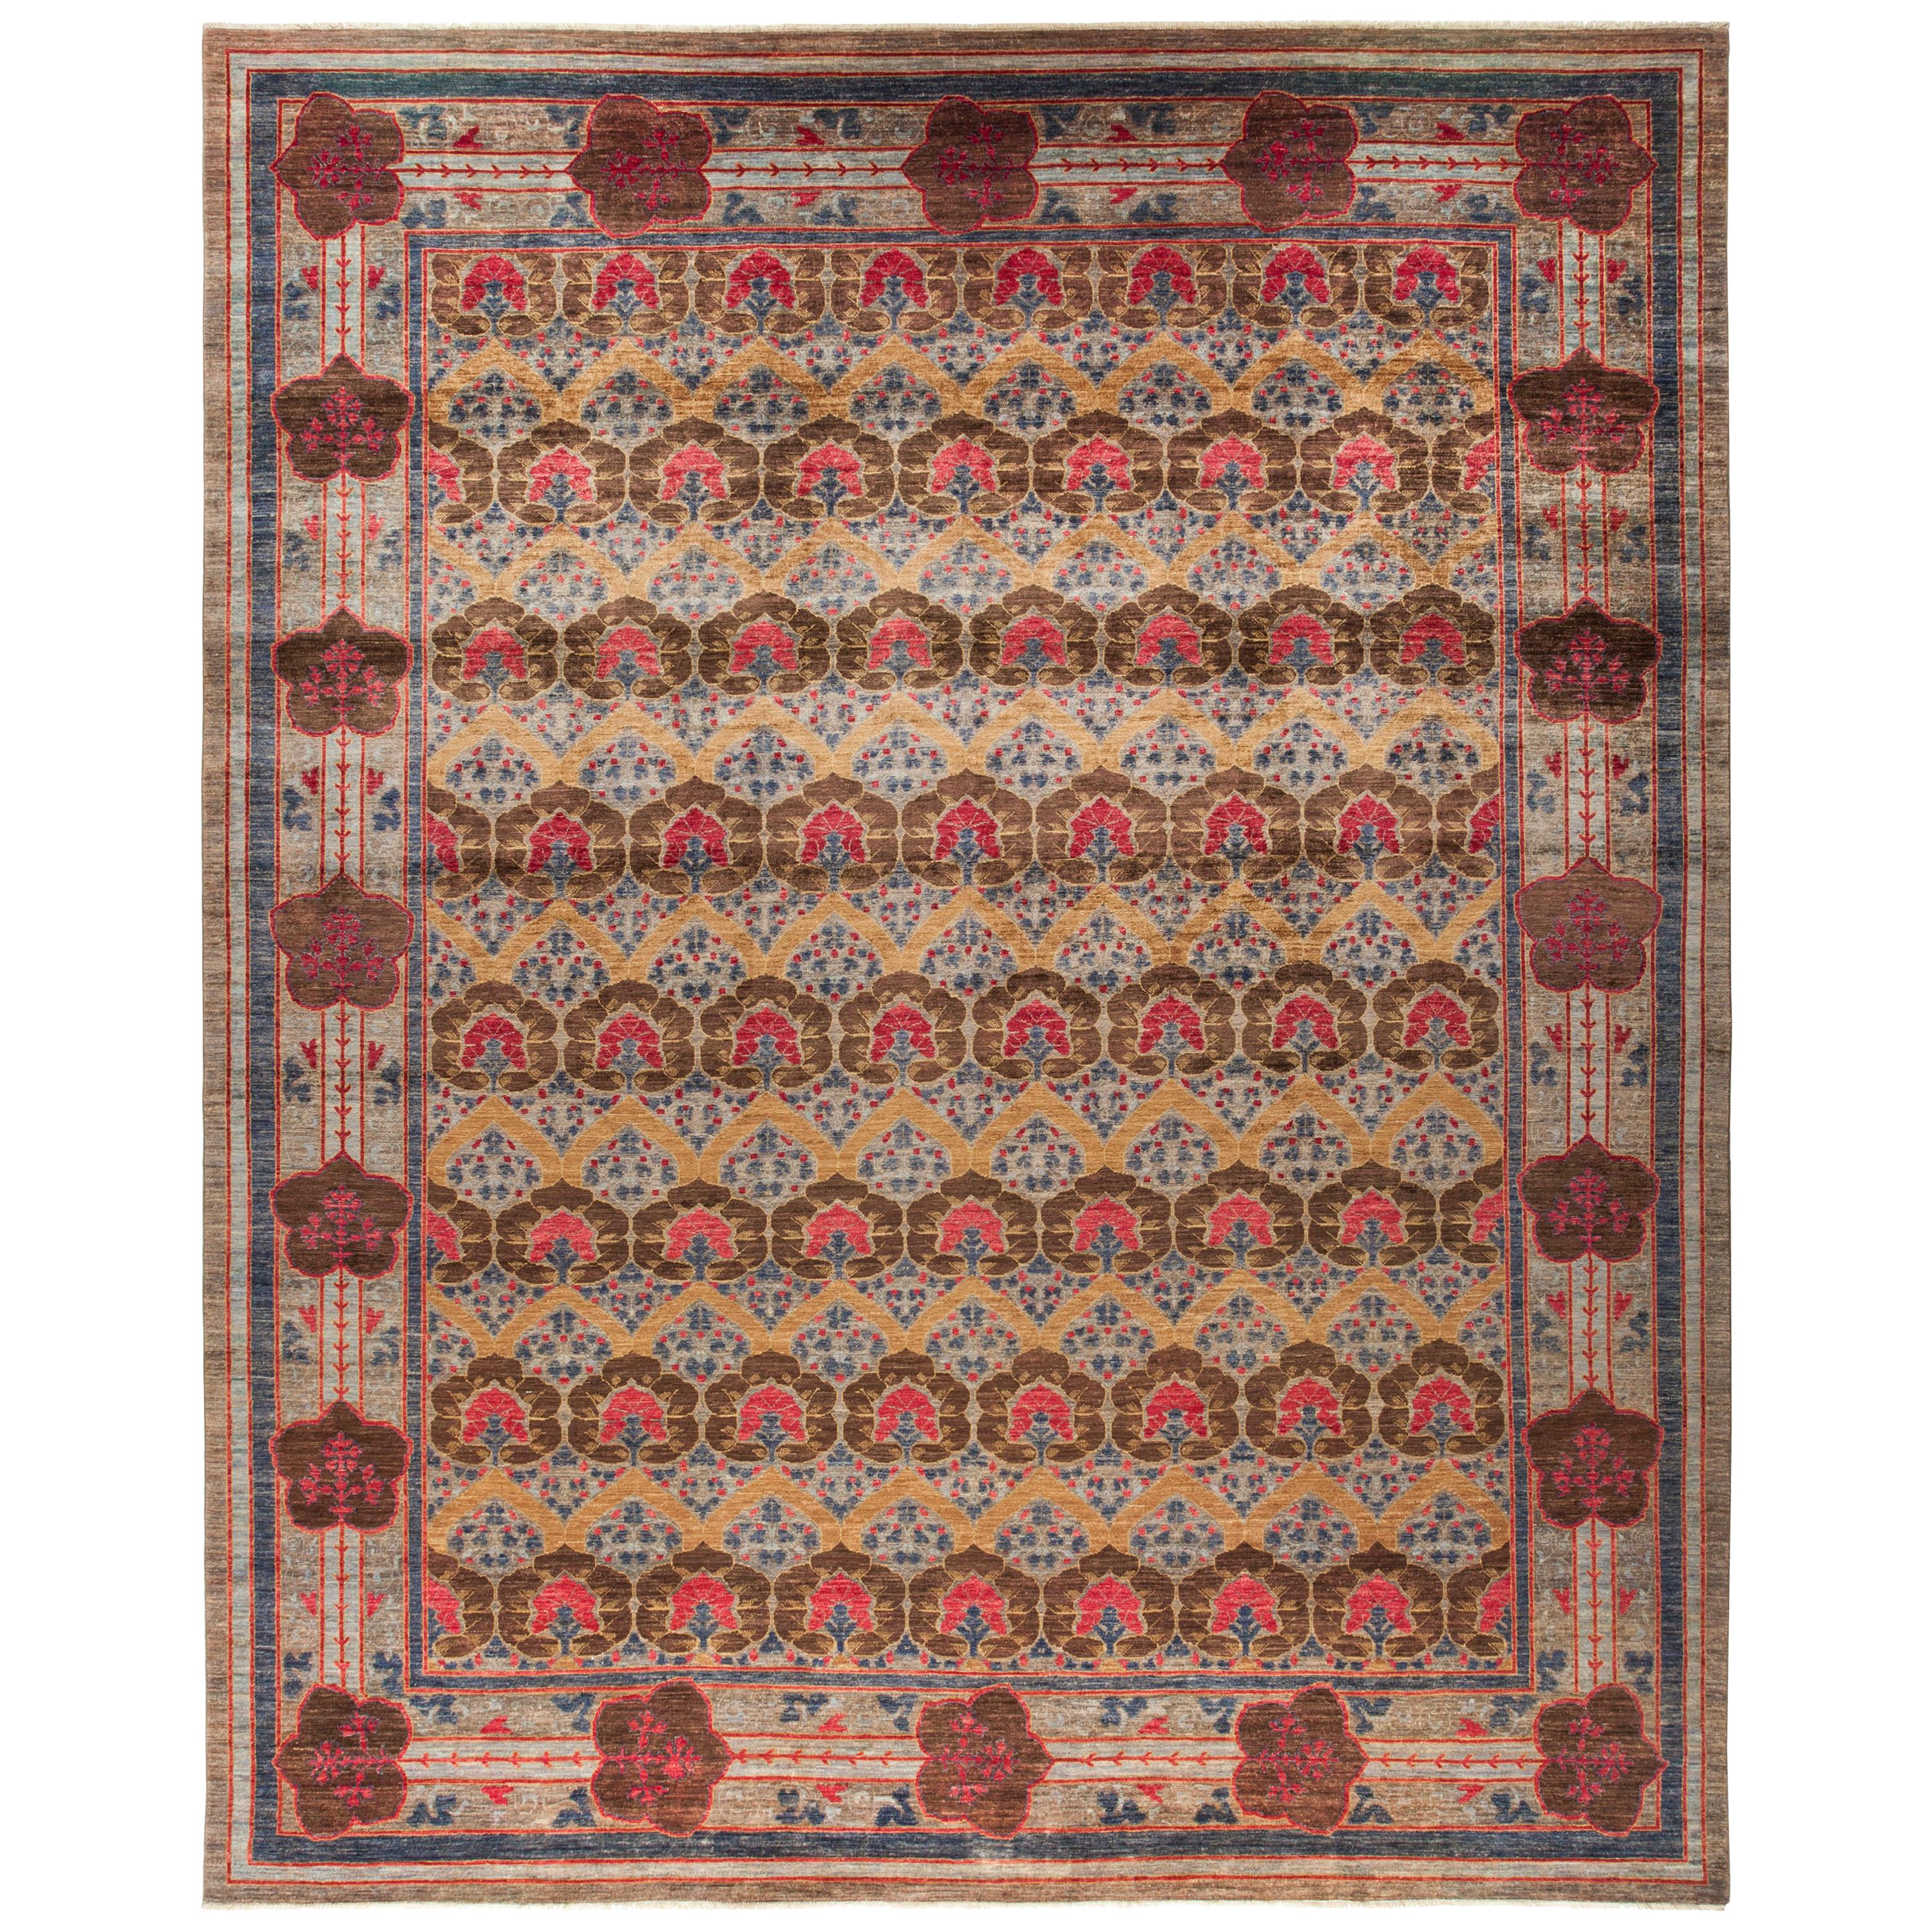 One-of-a-Kind Patterned & Floral Wool Handmade Area Rug, Mocha